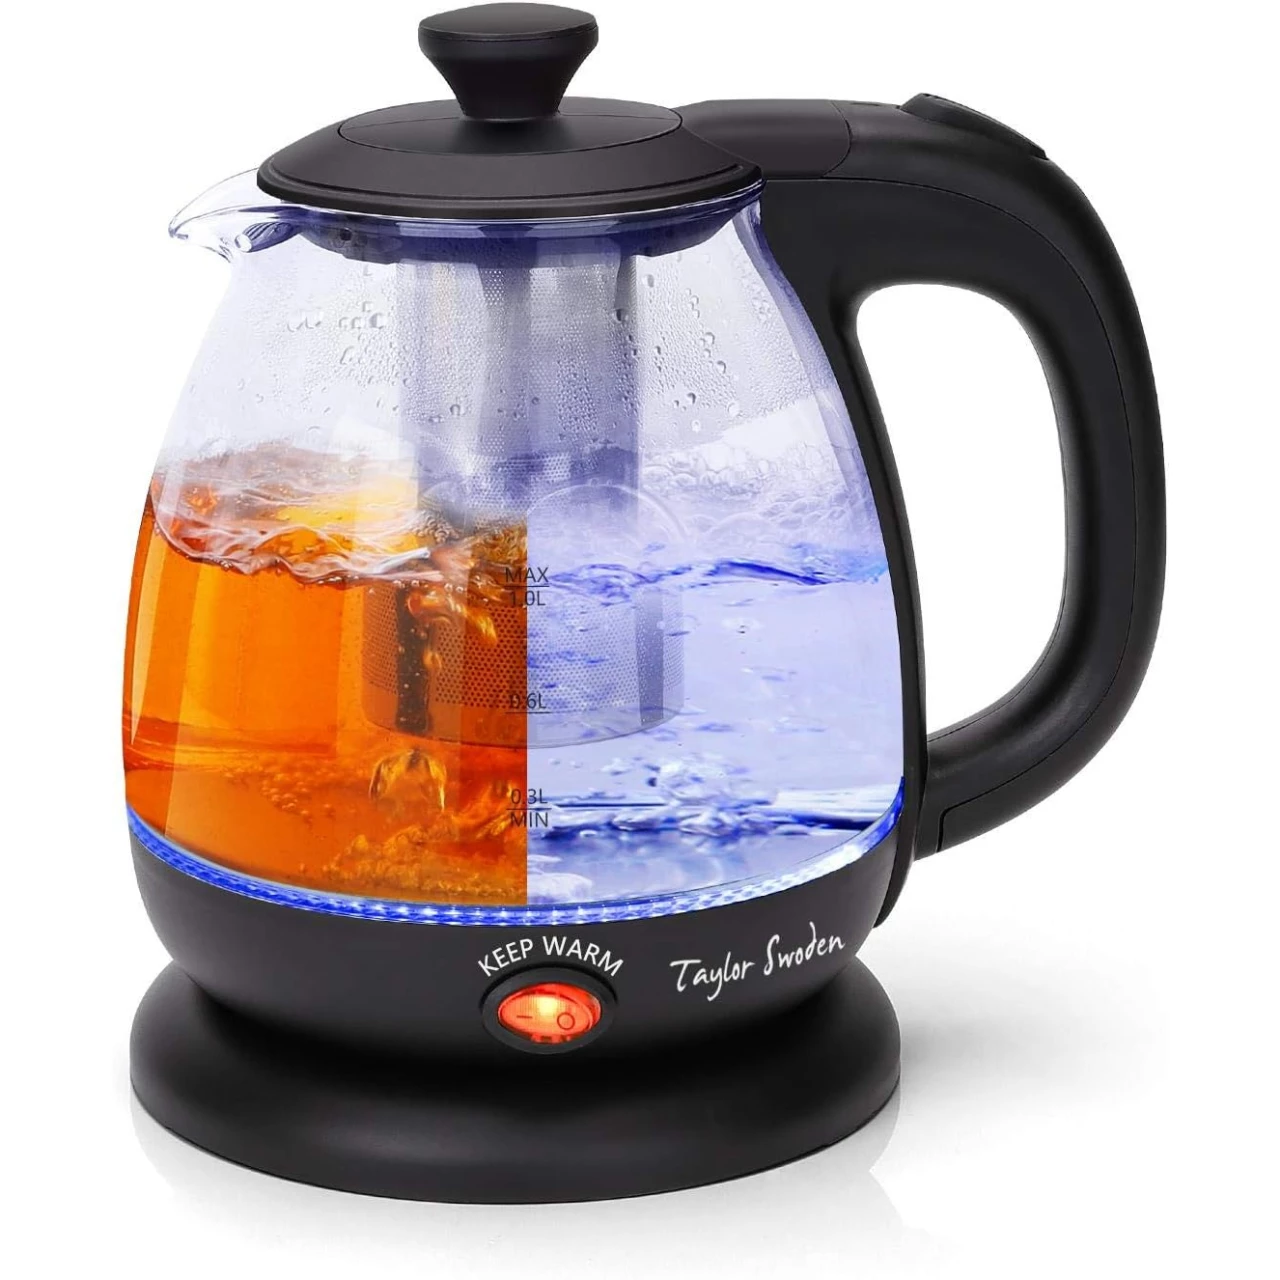 Electric Kettle with Tea Infuser, Small Electric Tea Kettle with Keep Warm Function for Home and Office, Black Taylor Swoden